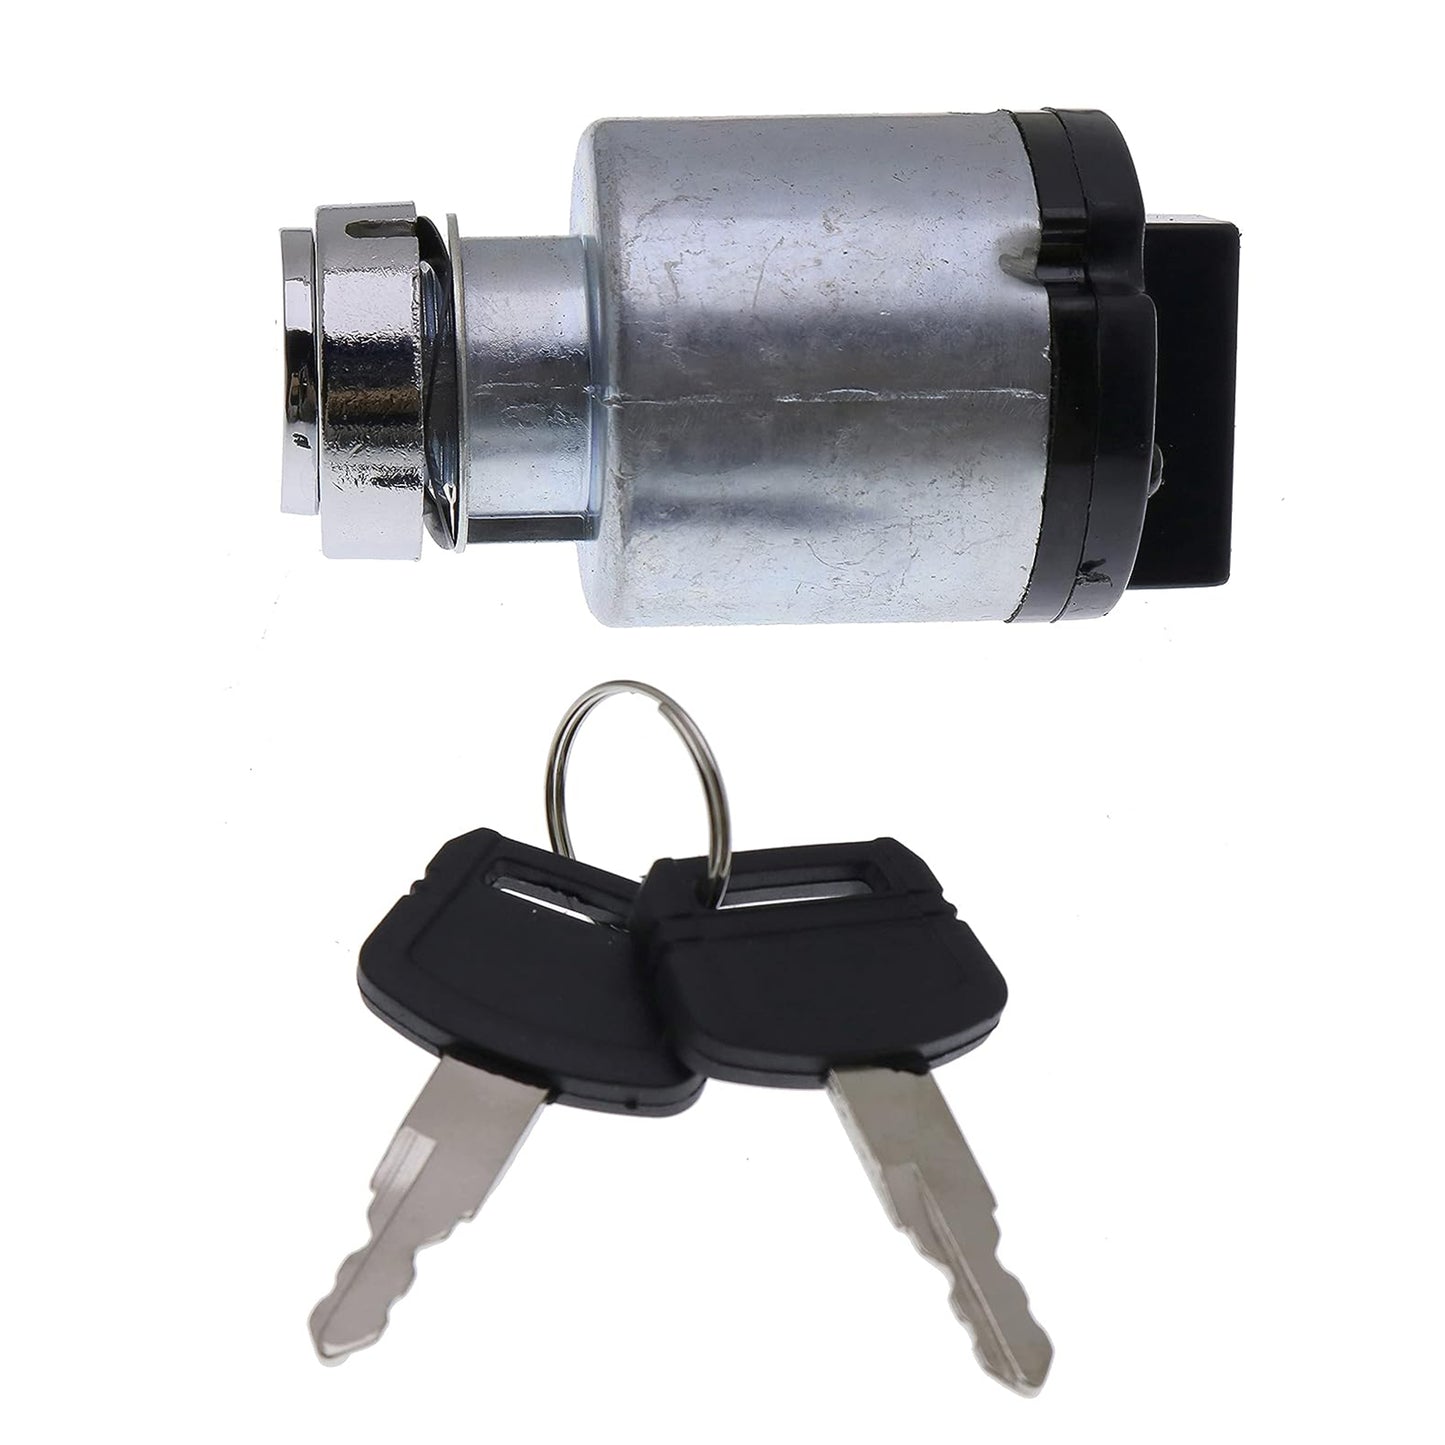 AT154992 Ignition Switch Compatible with Hitachi EX60-3 EX100-3 EX120-3 EX200-2 EX200-3